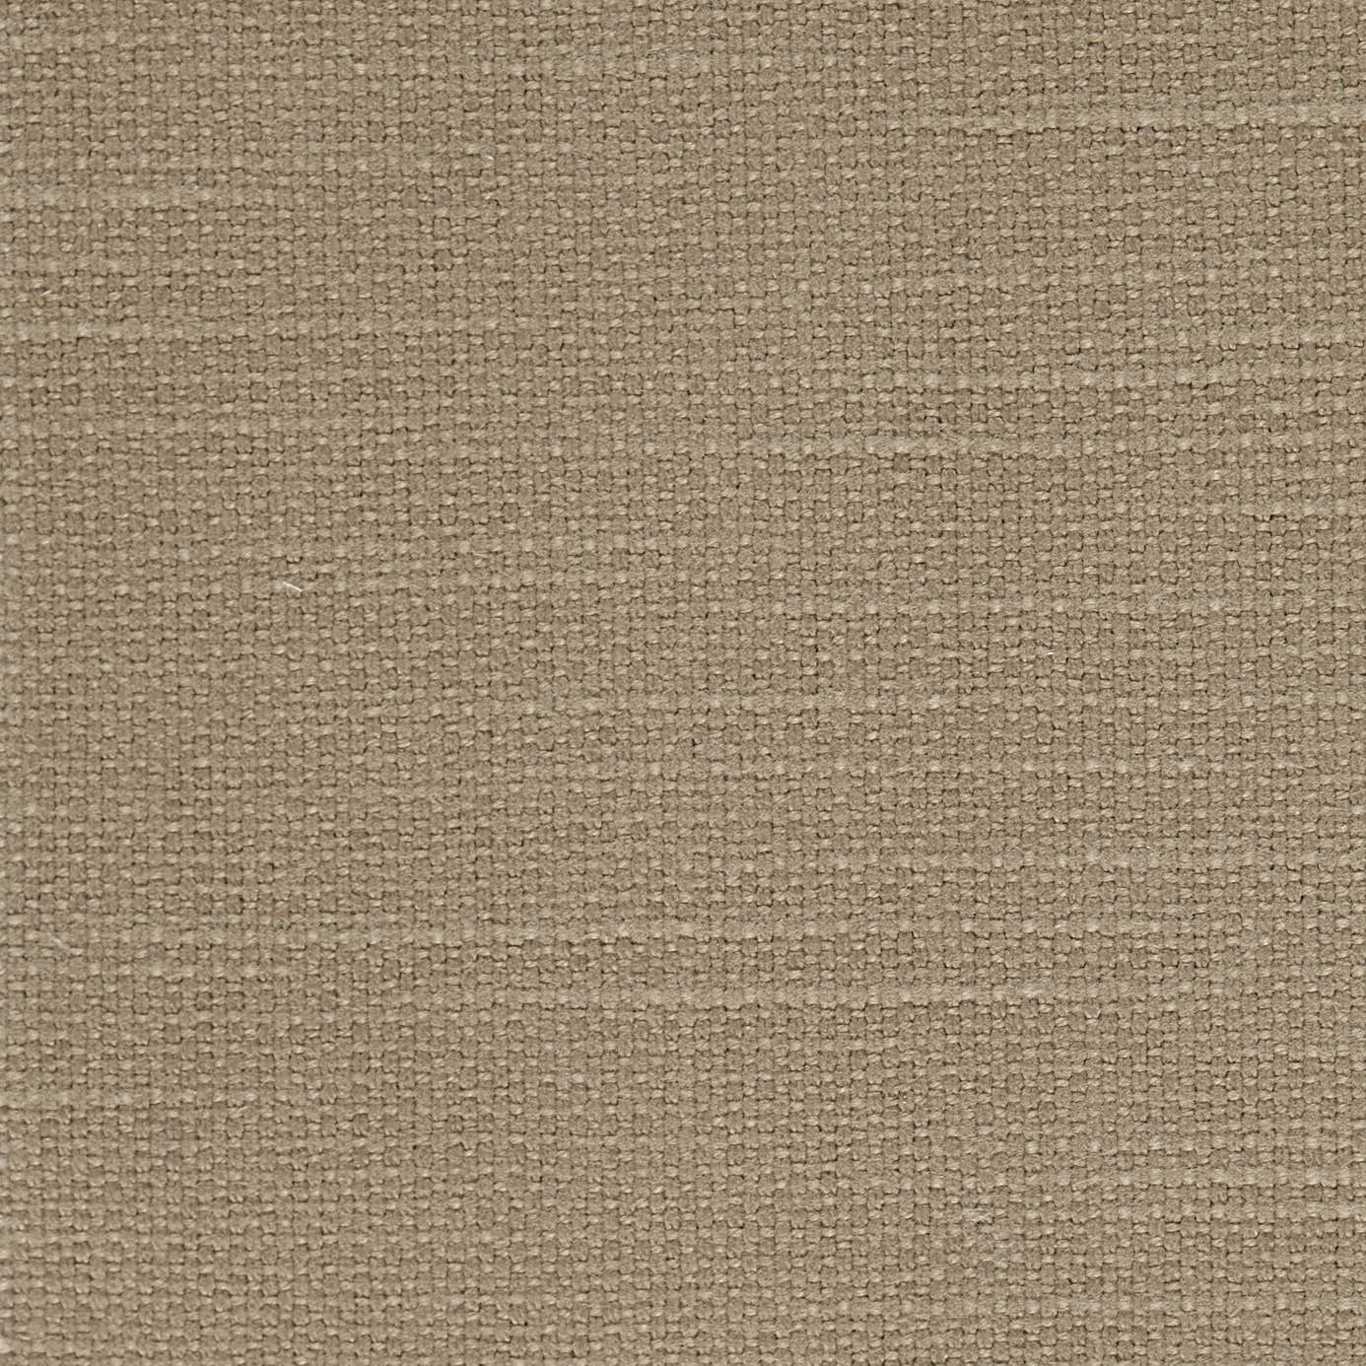 Frequency Tawny Fabric by HAR